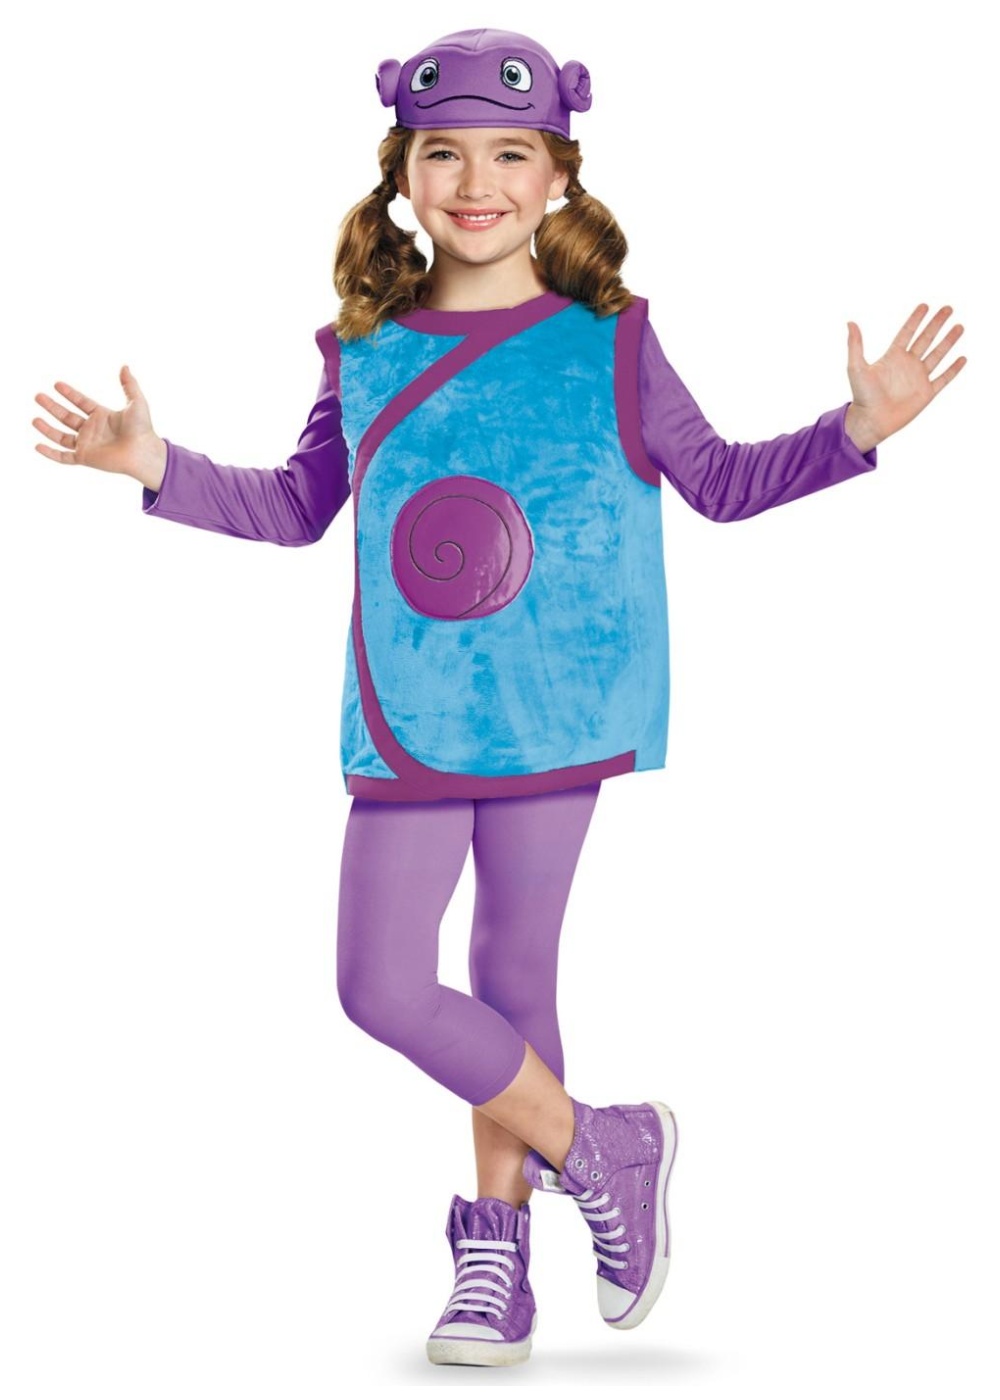 Dreamworks Home Oh Girls Costume Deluxe